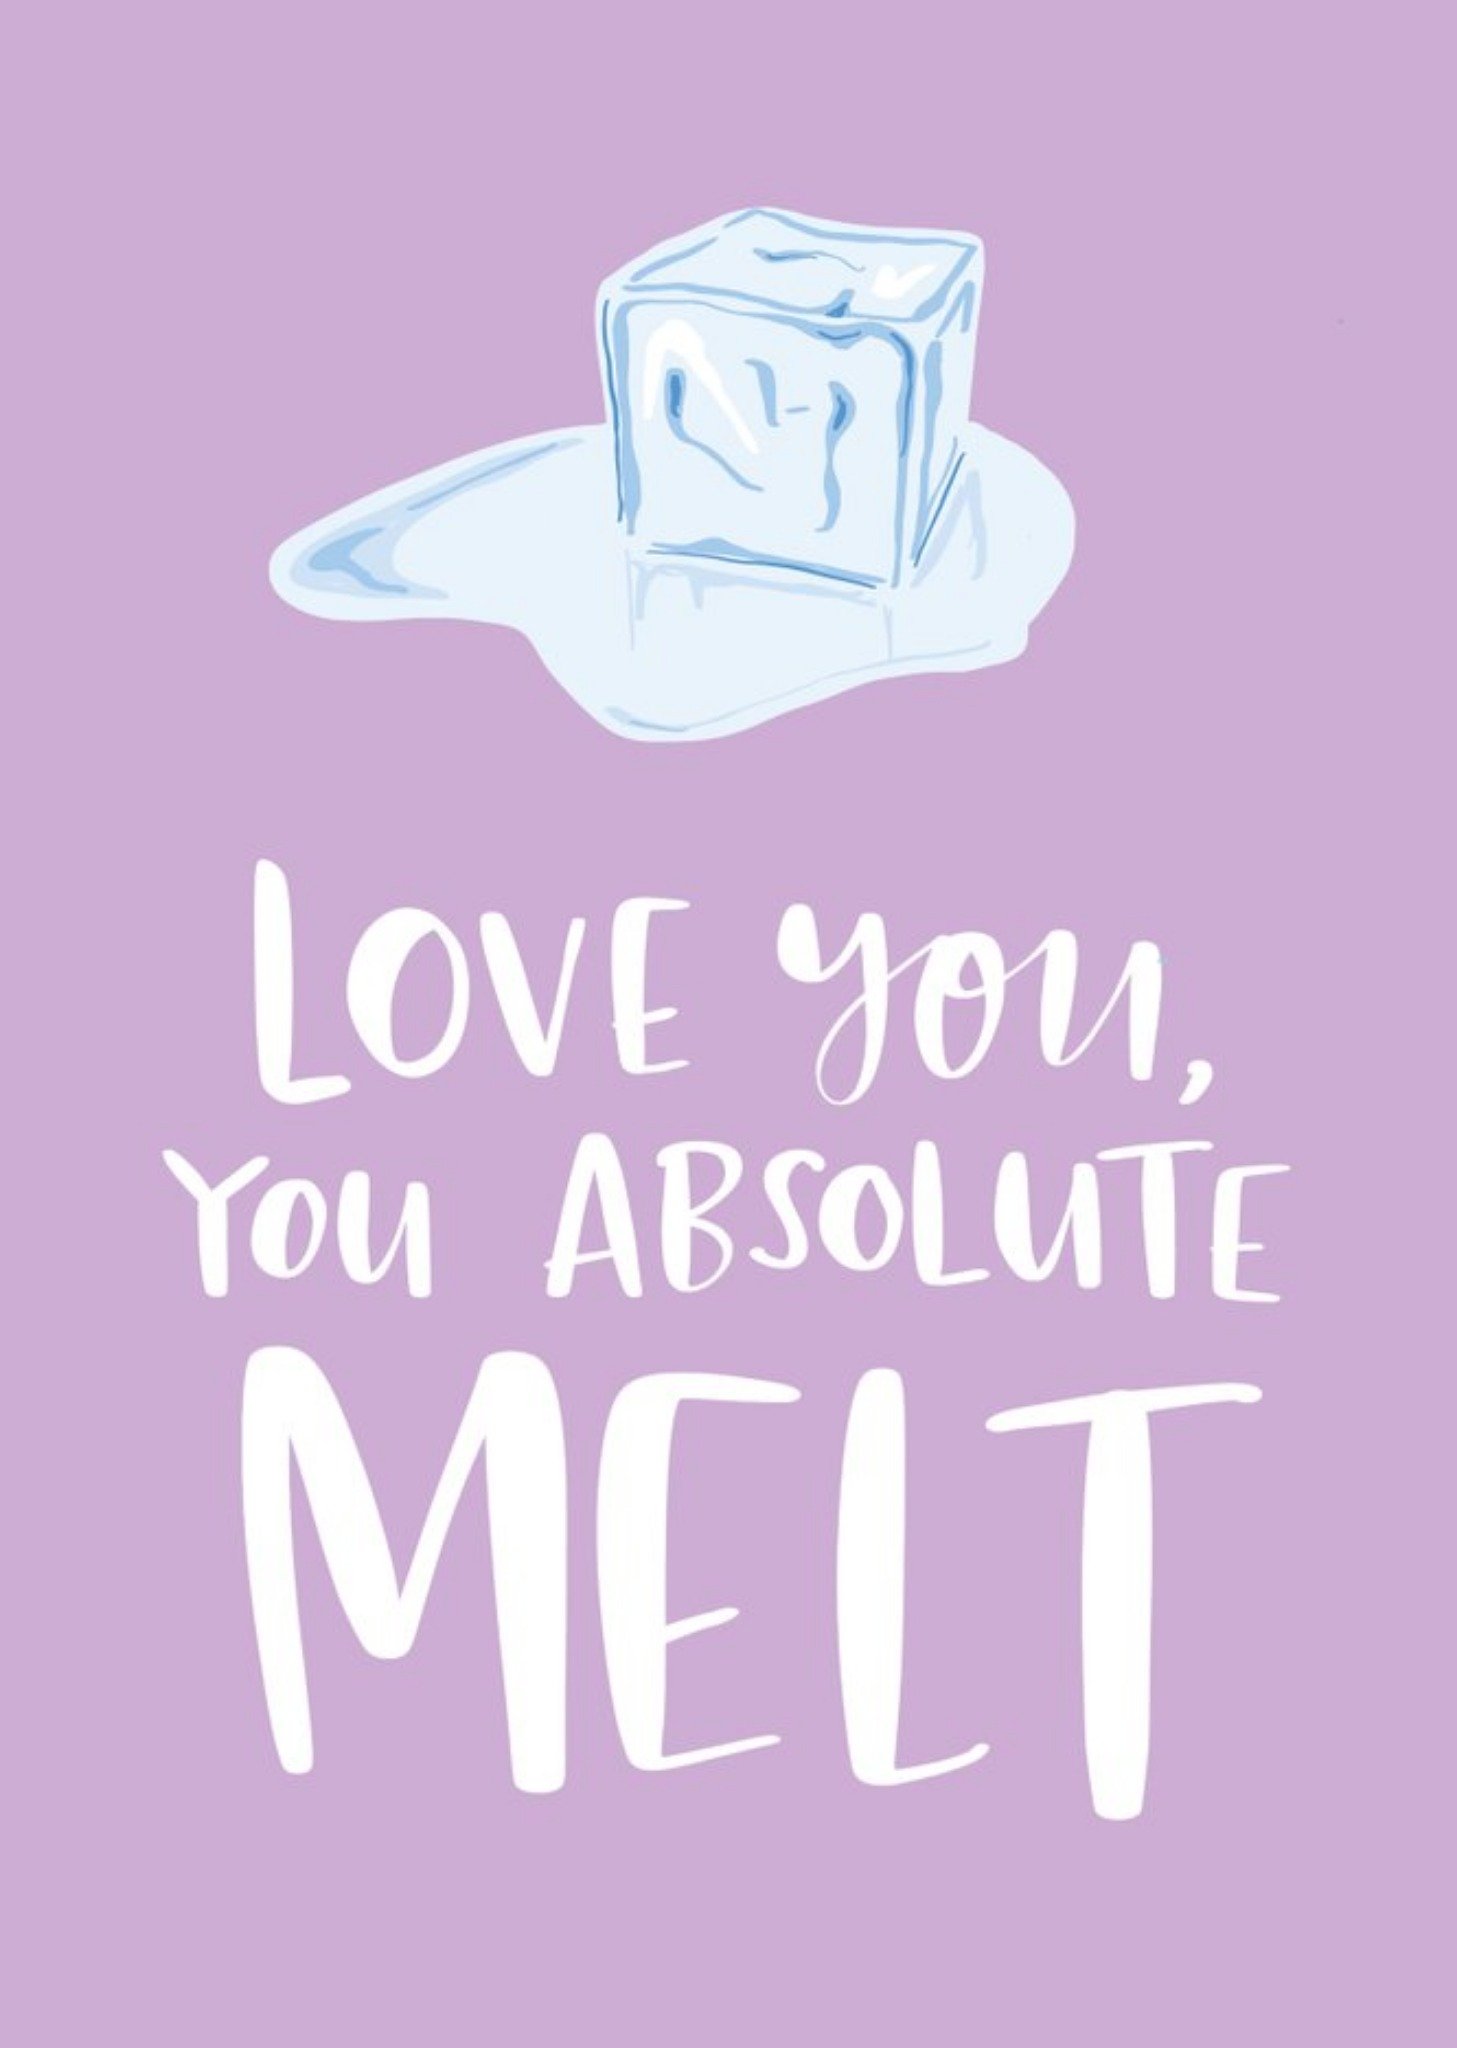 Moonpig Ice Cube Love Melt Funny Cute Romantic Valentines Day Card, Large